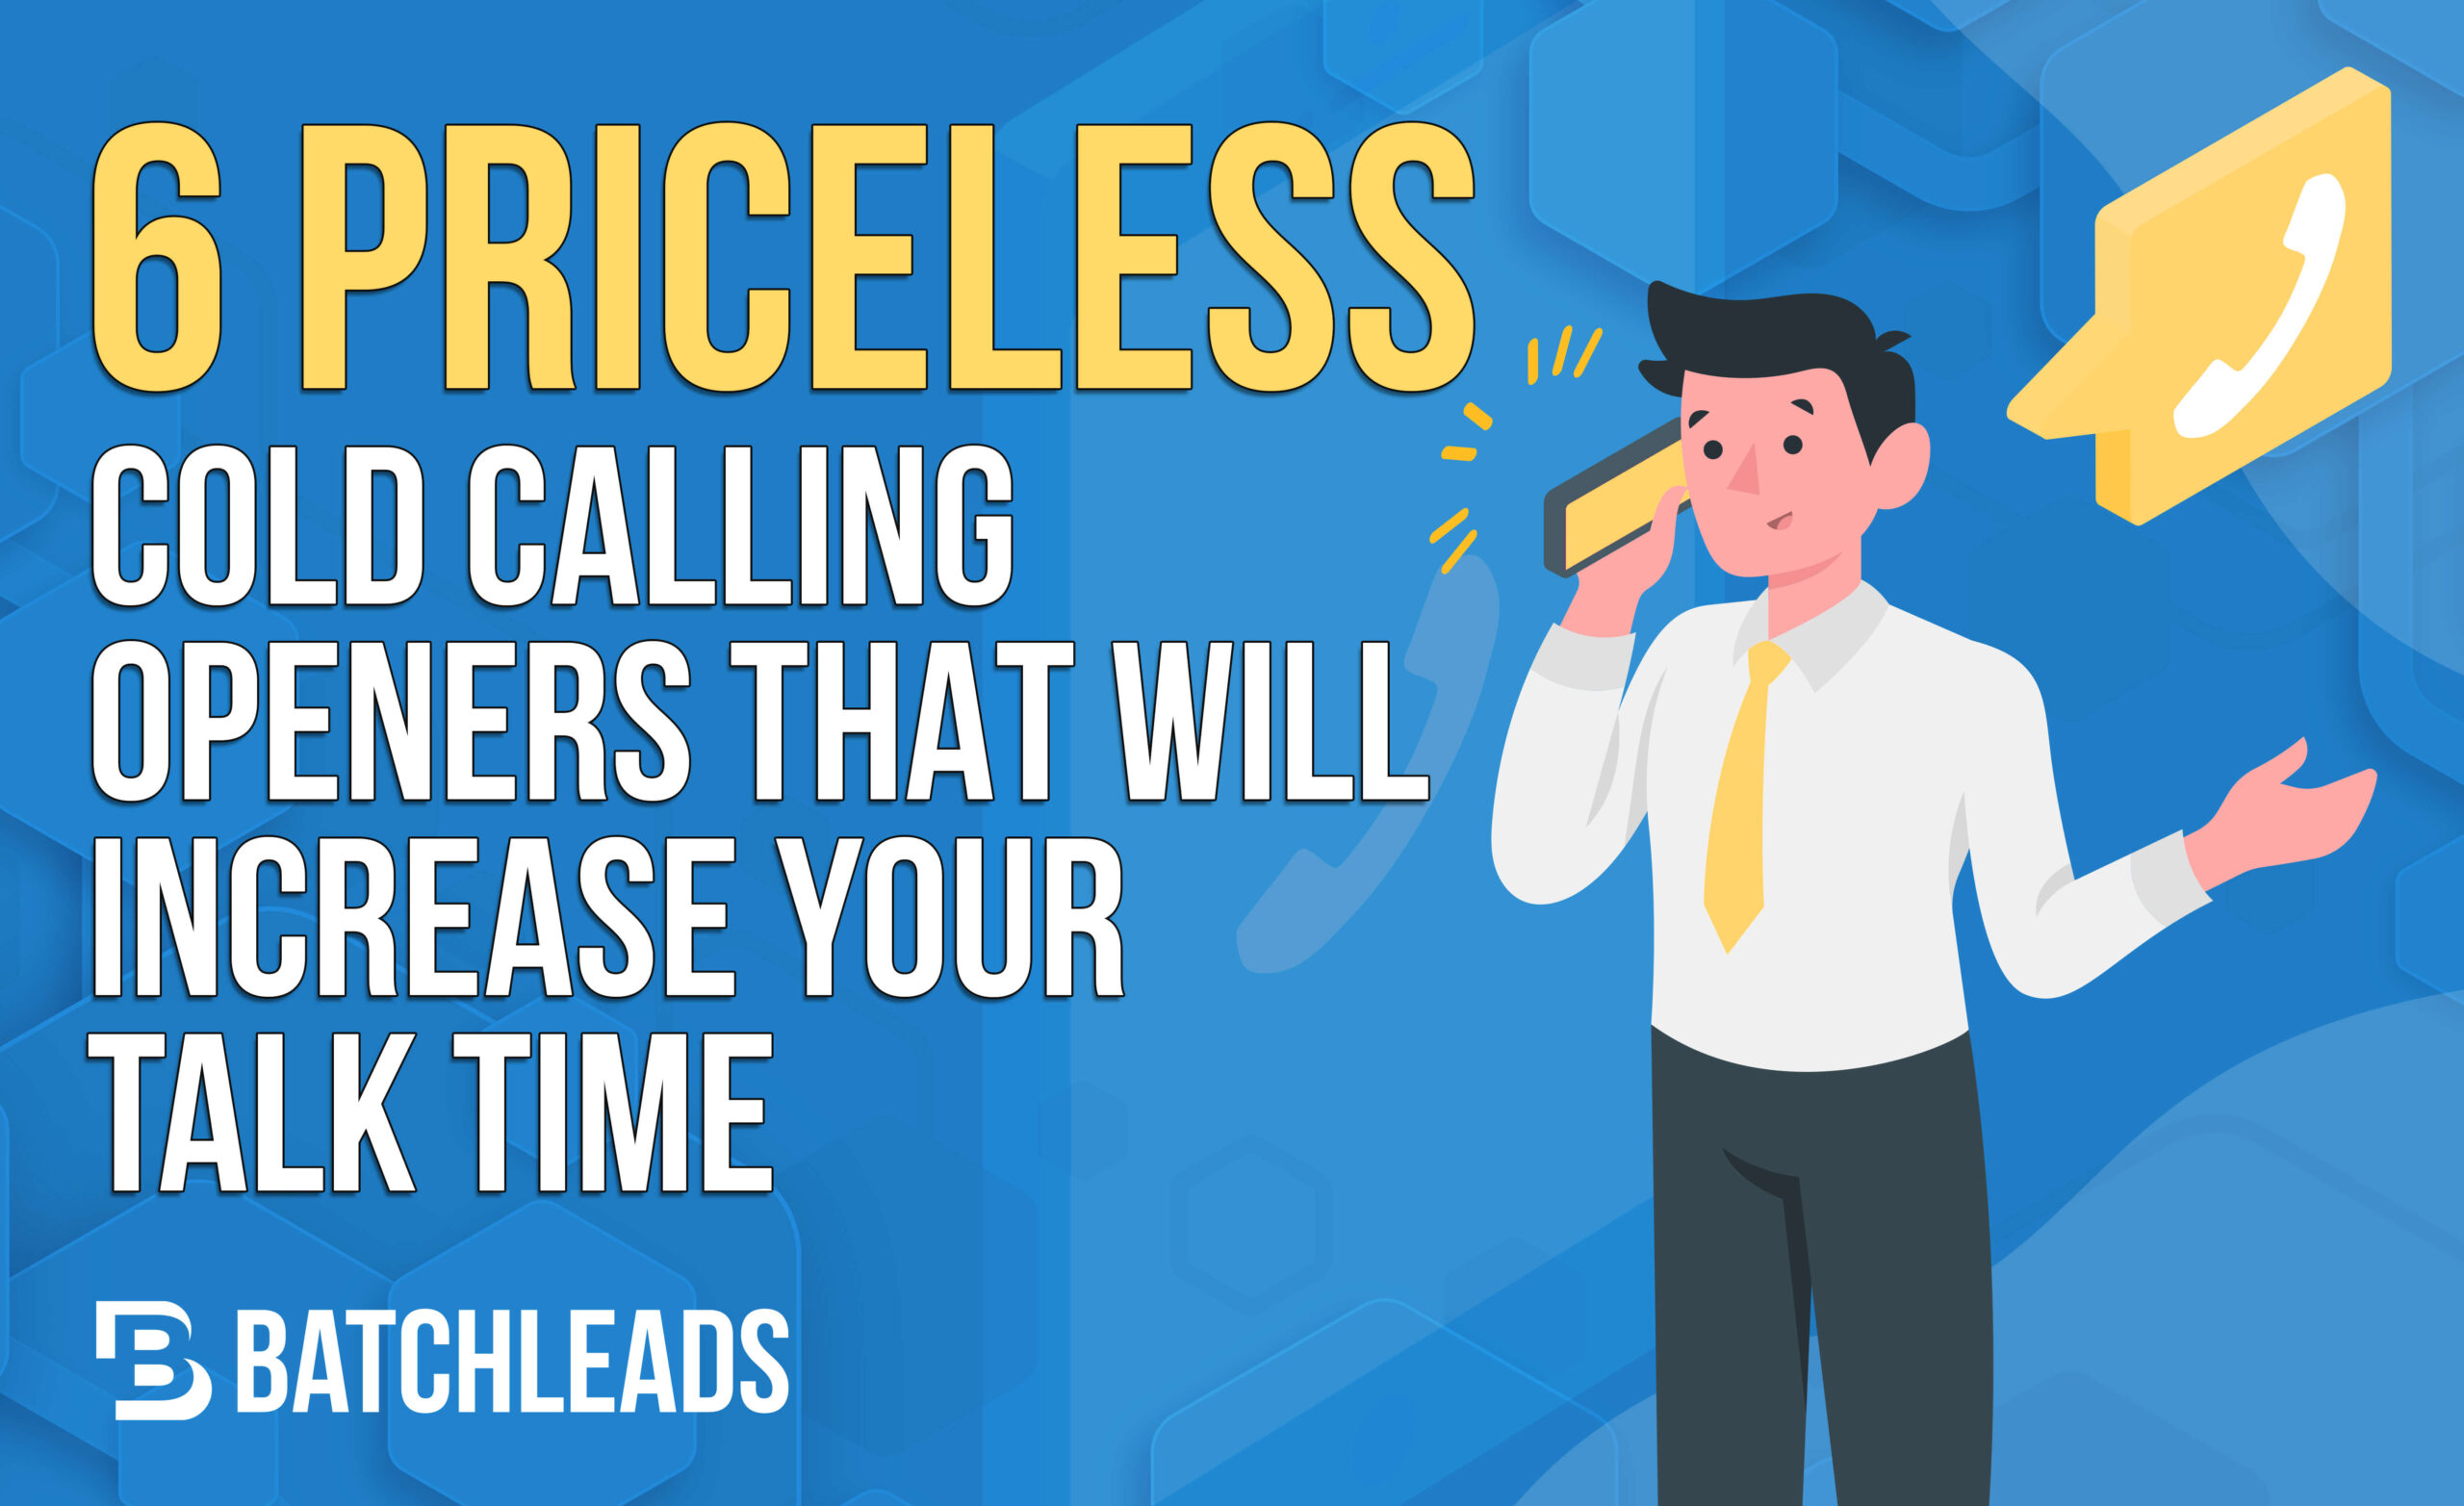 6 Priceless Cold Calling Openers That Will Increase Your Talk Time